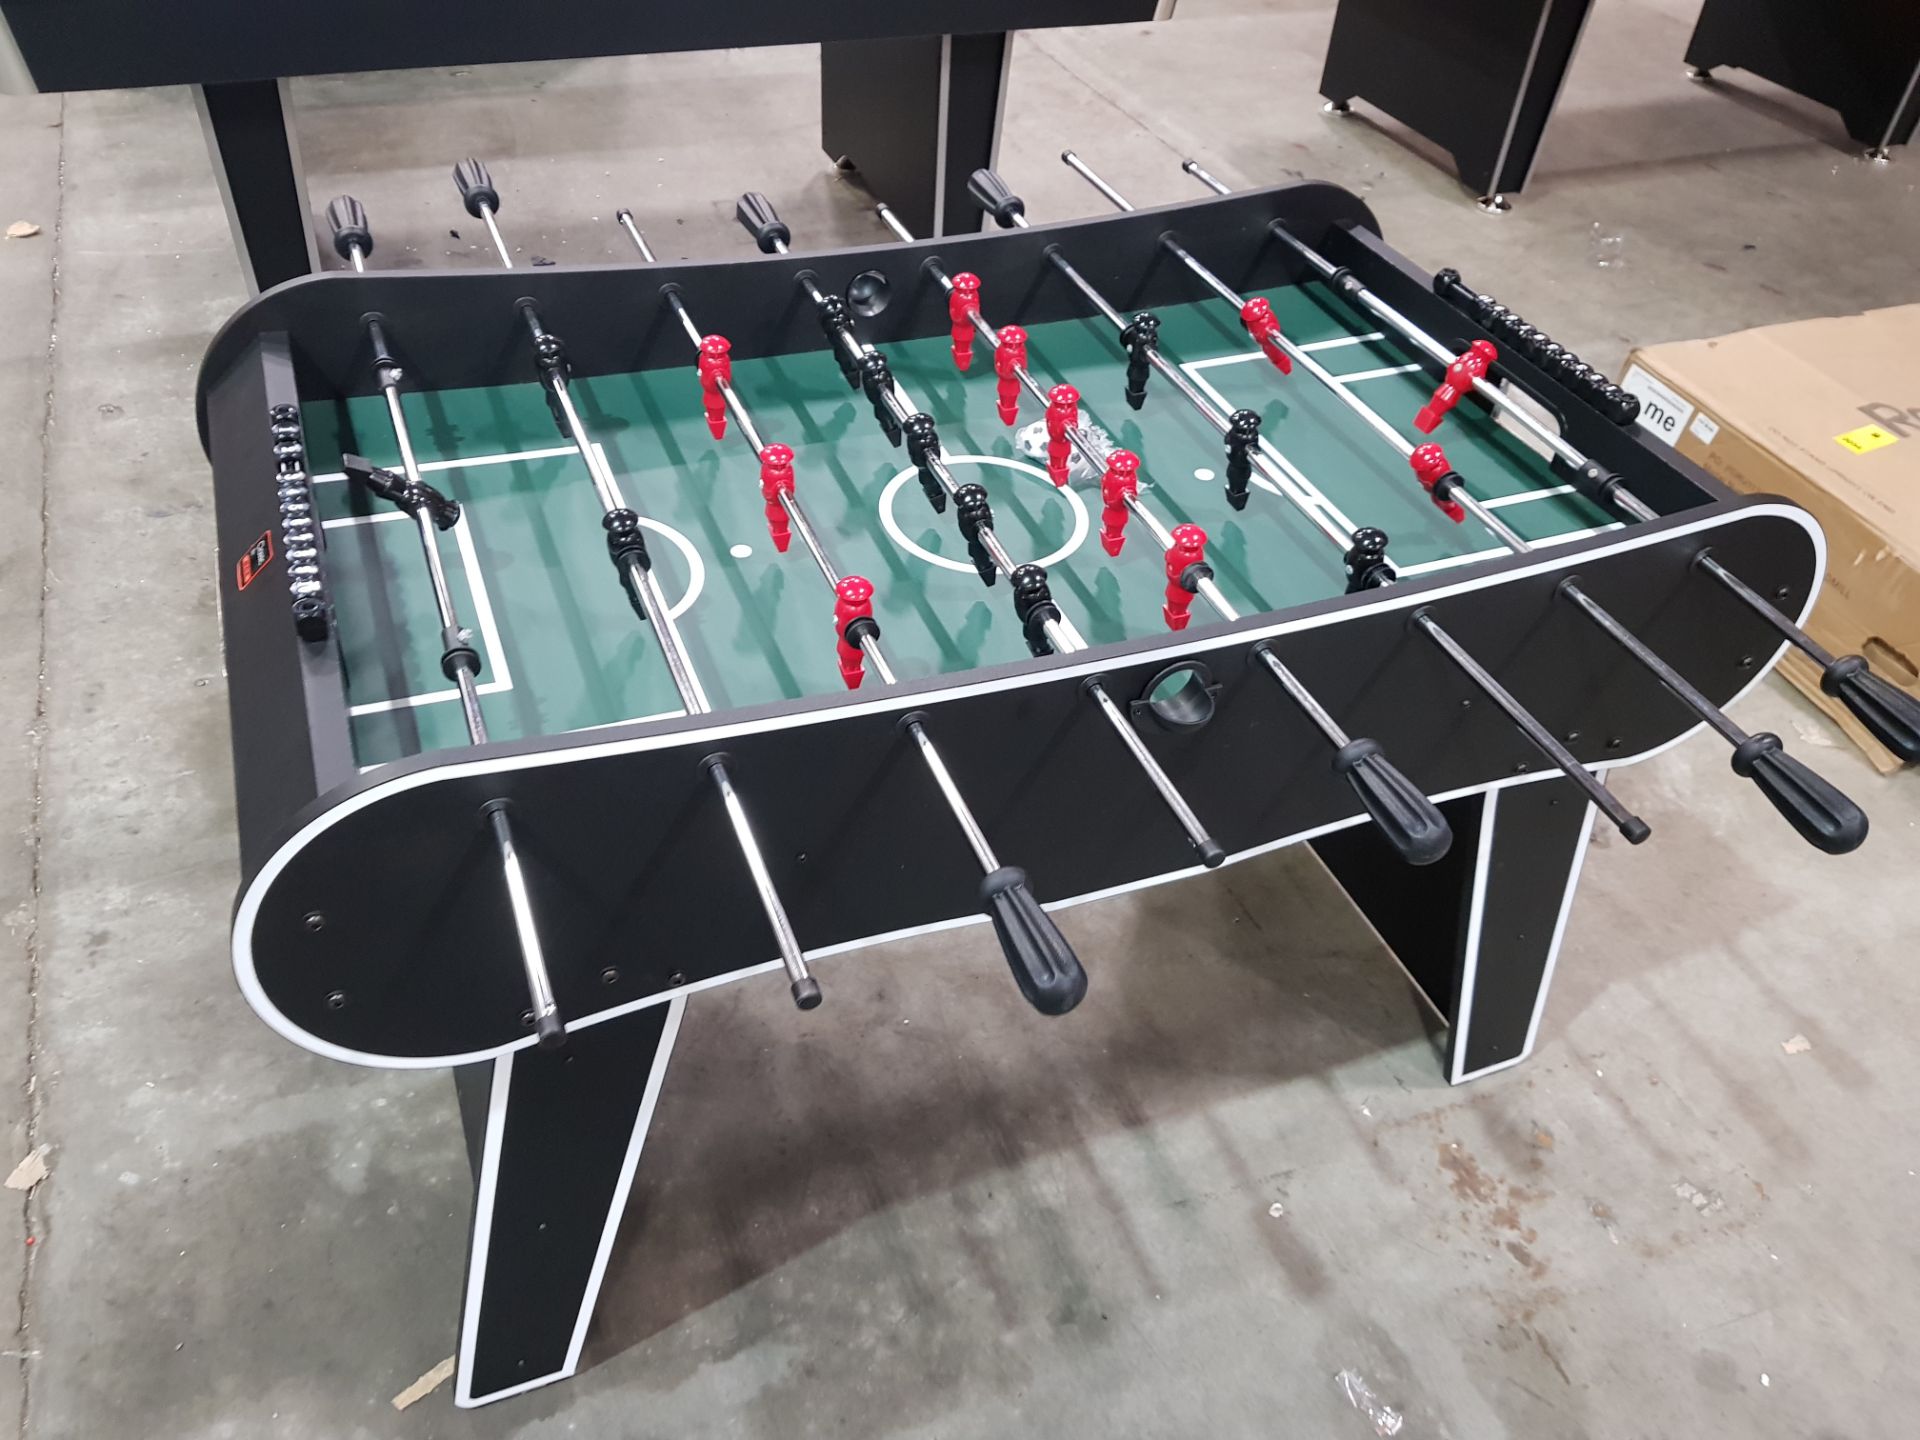 1 X BRAND NEW ASSEMBLED BCE 4 FT 6 INCH FOOTBALL TABLE (MODEL : FT5405 ) - NO BOX - INCLUDES SCORE